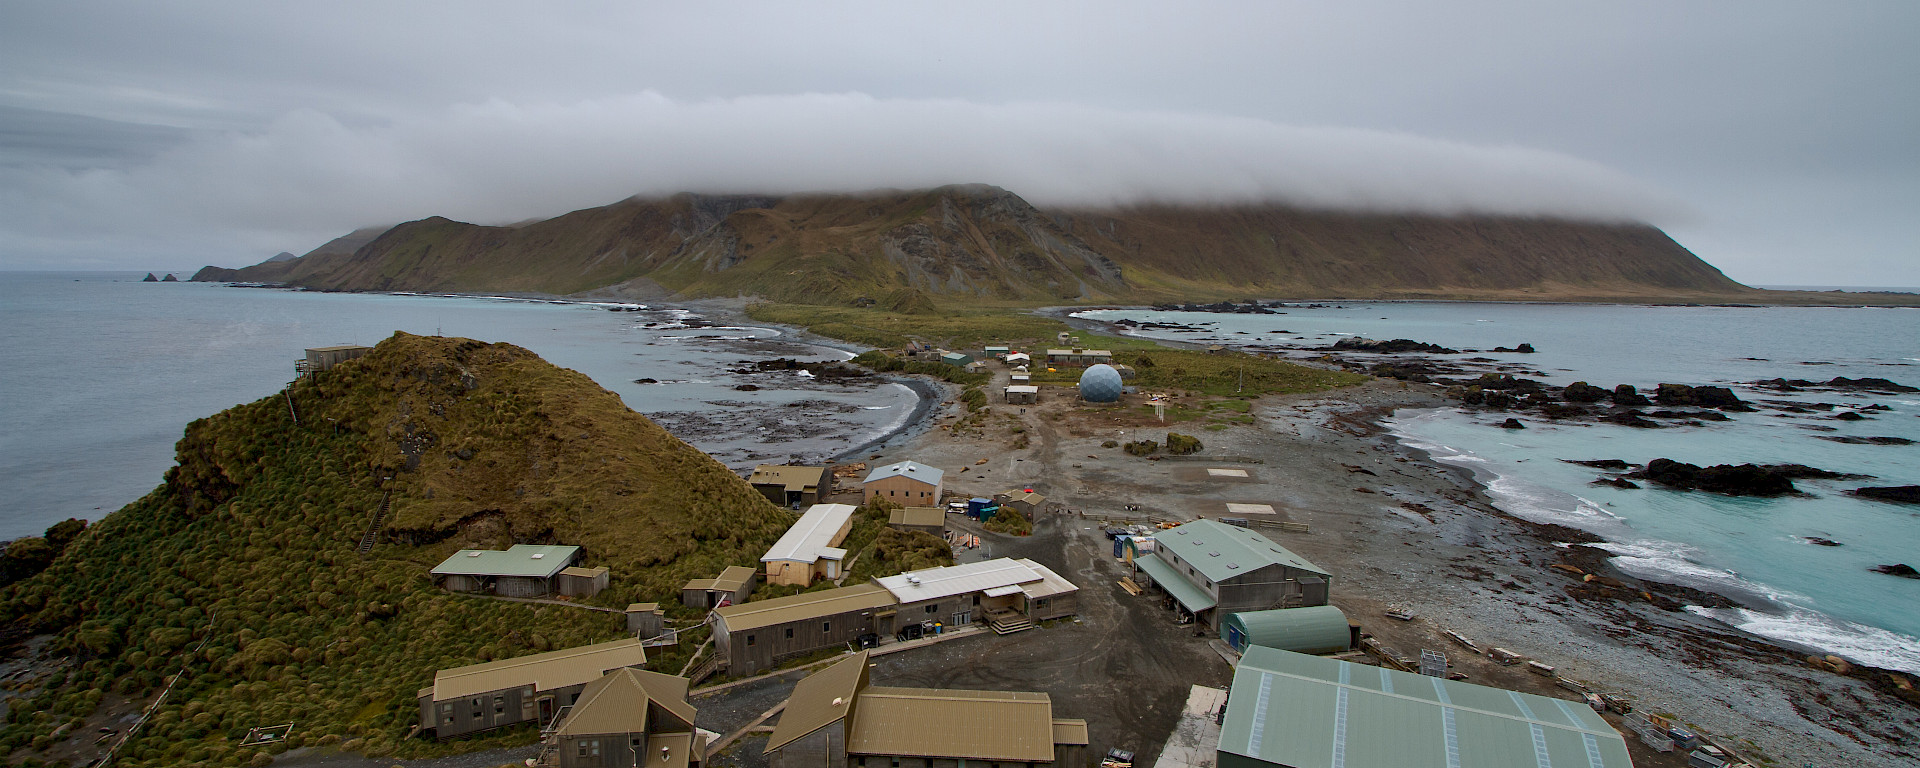 View of Macquarie Island research station from Wireless Hill.